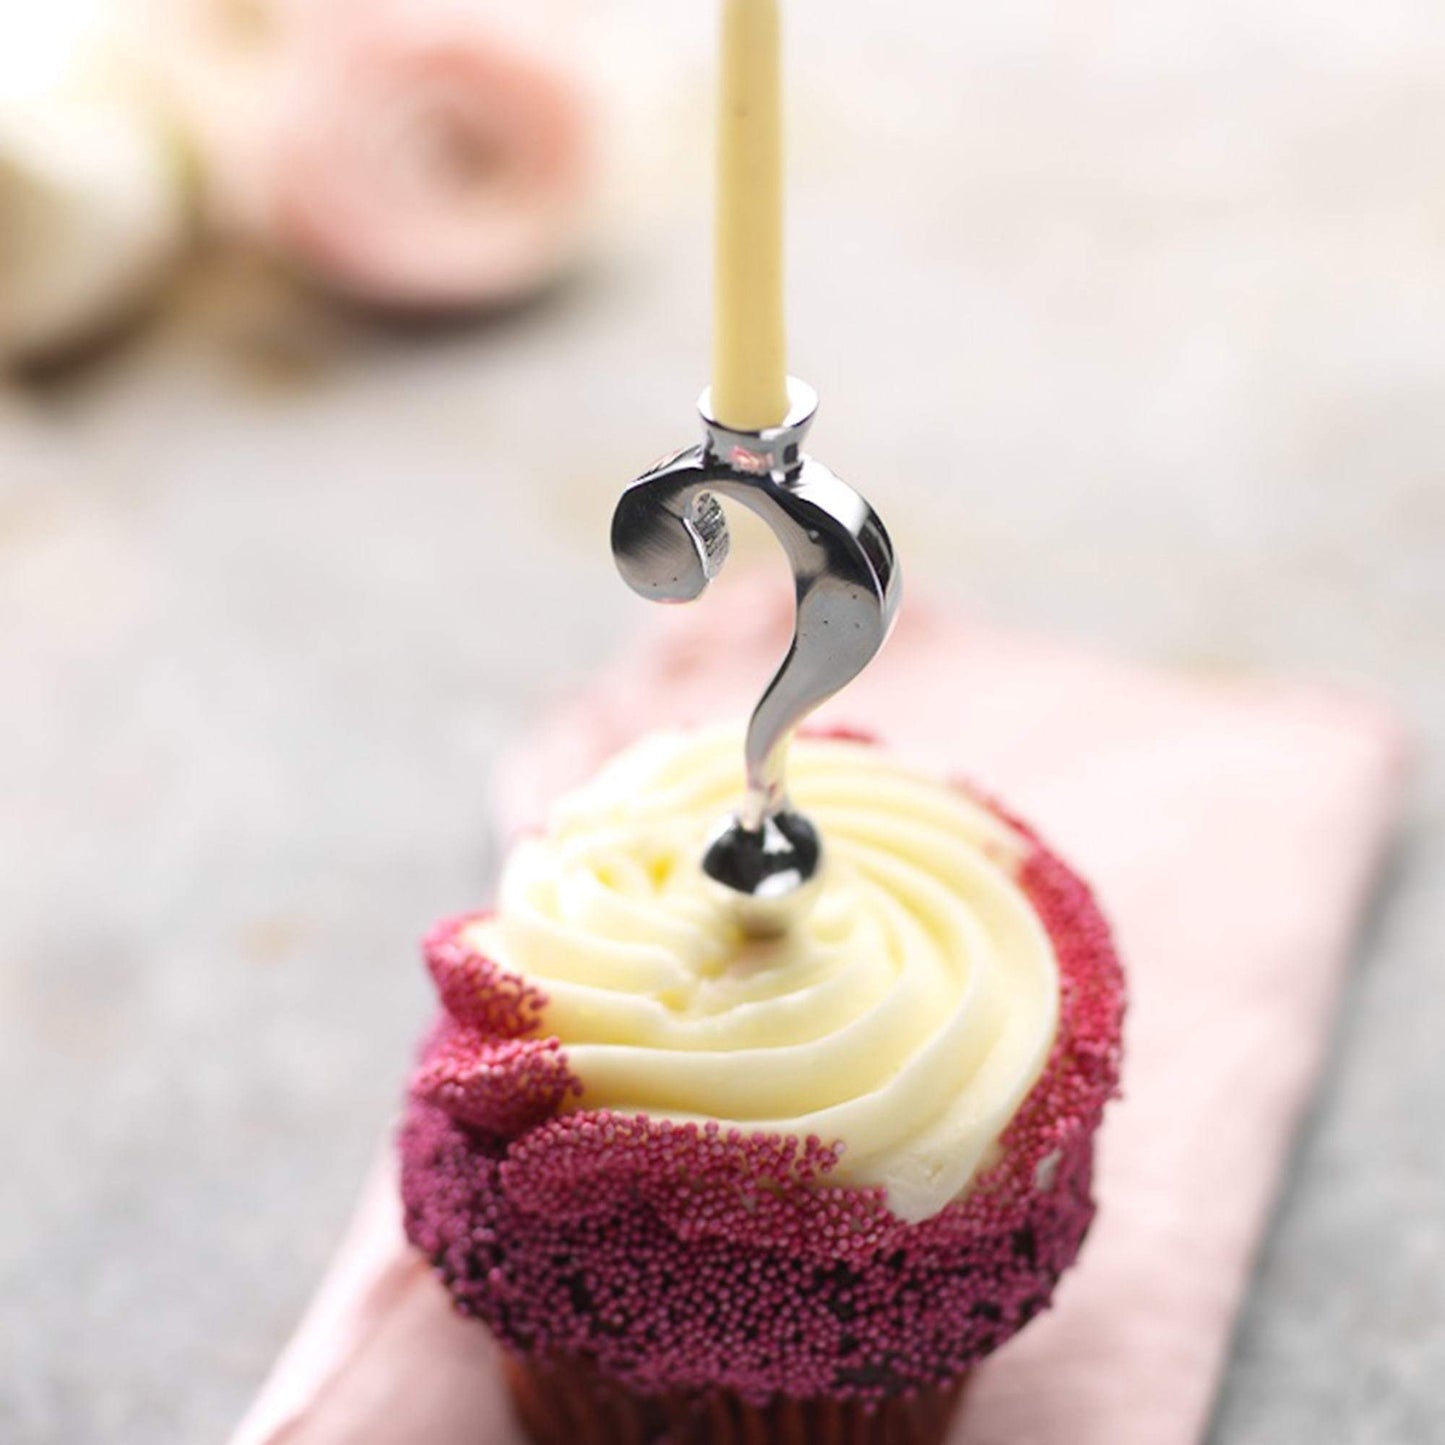 Silver Question Mark Candle Holder in a cupcake